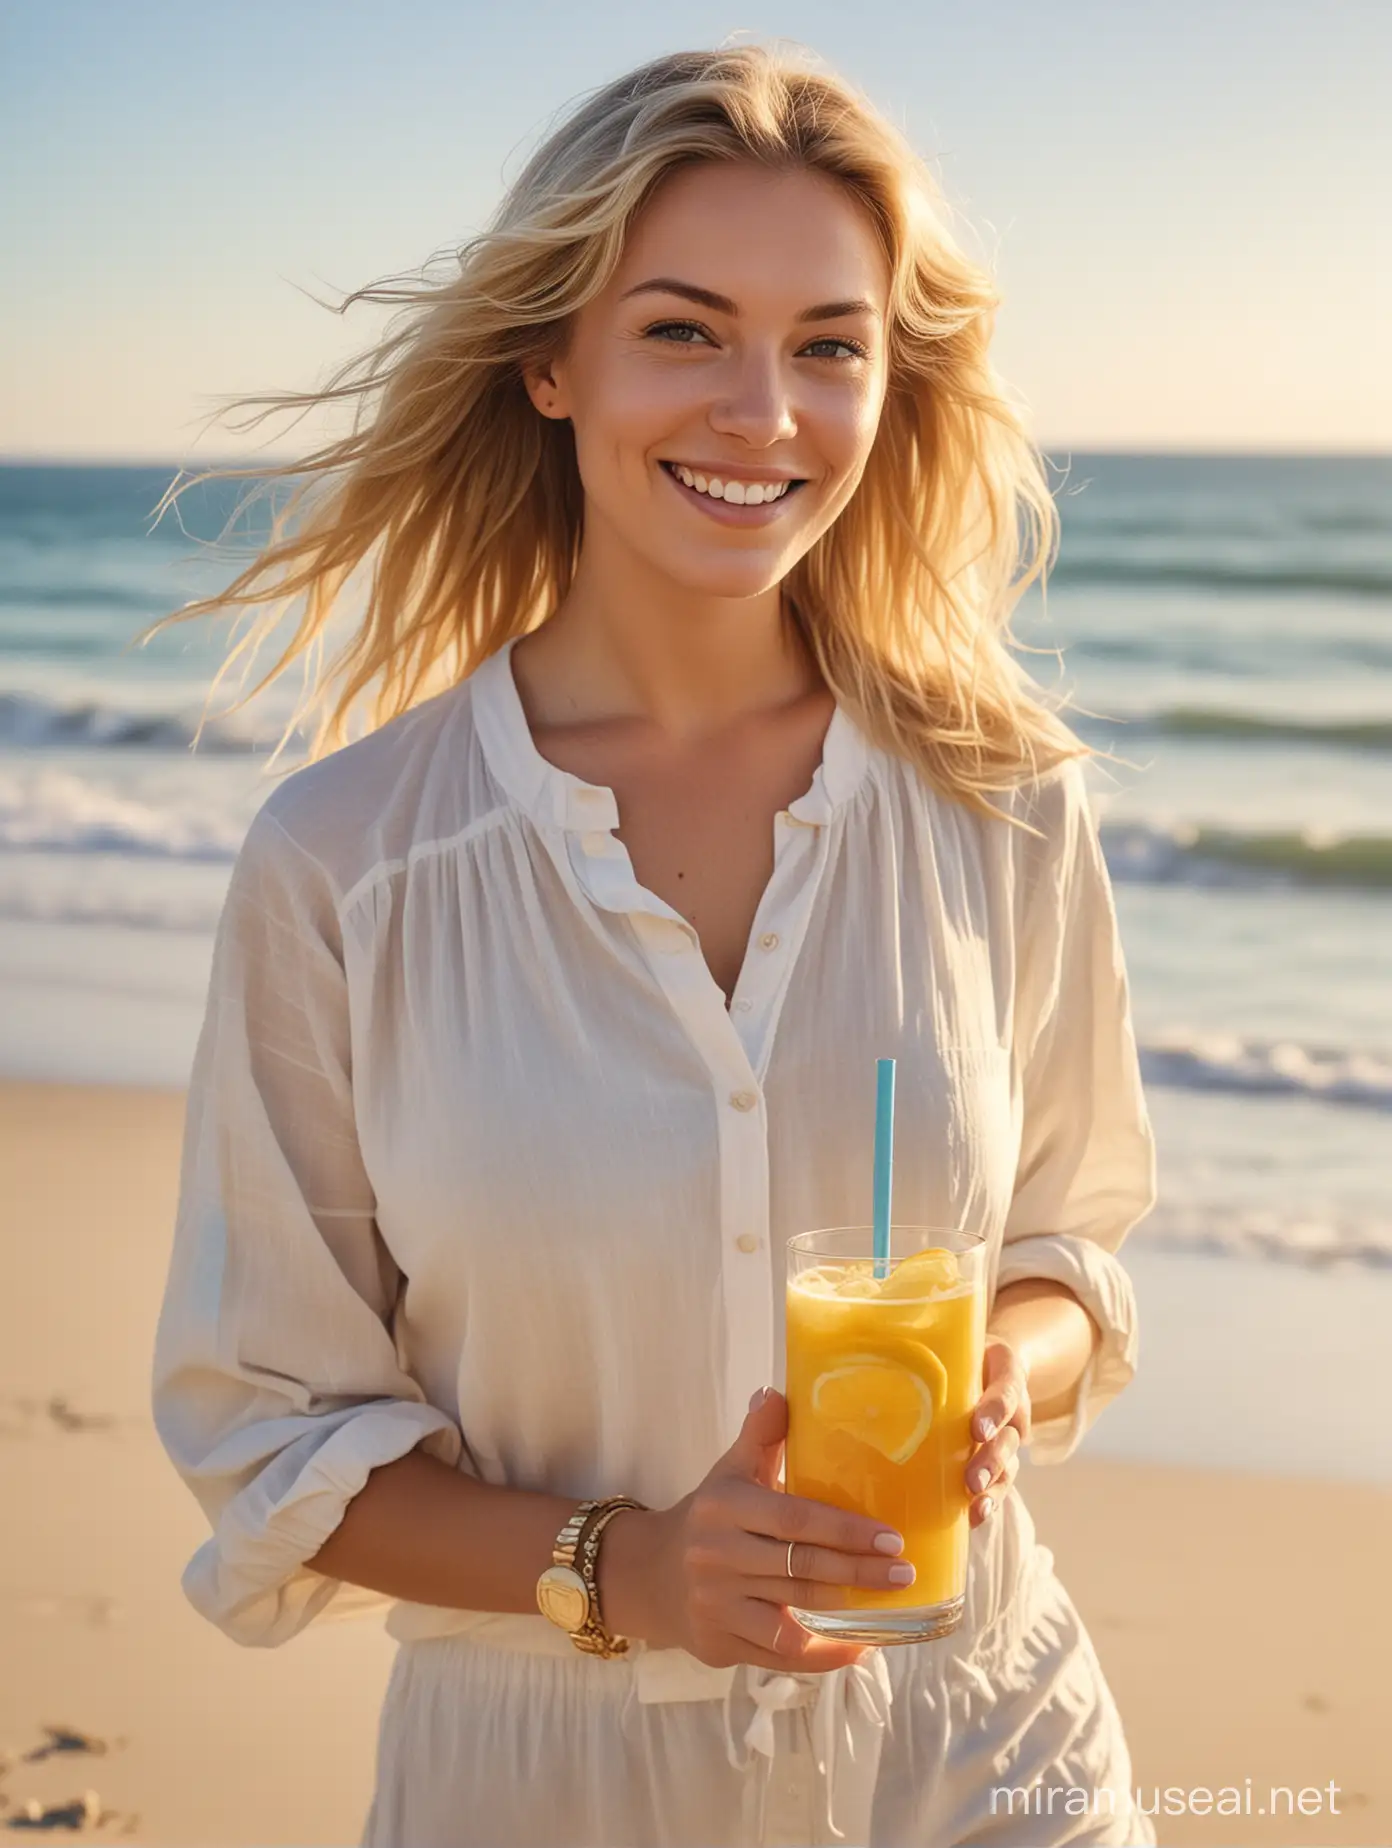 Watercolor portrait, happy adult Caucasian blonde woman on beach, holding non-alcoholic healthy drink with lemon, gaze fixed straight on camera, sun-kissed skin, gentle sea breeze tousling her hair, background of ocean horizon meeting soft pastel sky, reflection of the sun casting a warm glow, glittering sands beneath her feet, casual beach attire, relaxed posture, candid expression, golden hour lighting, vibrant, highly detailed, digital painting